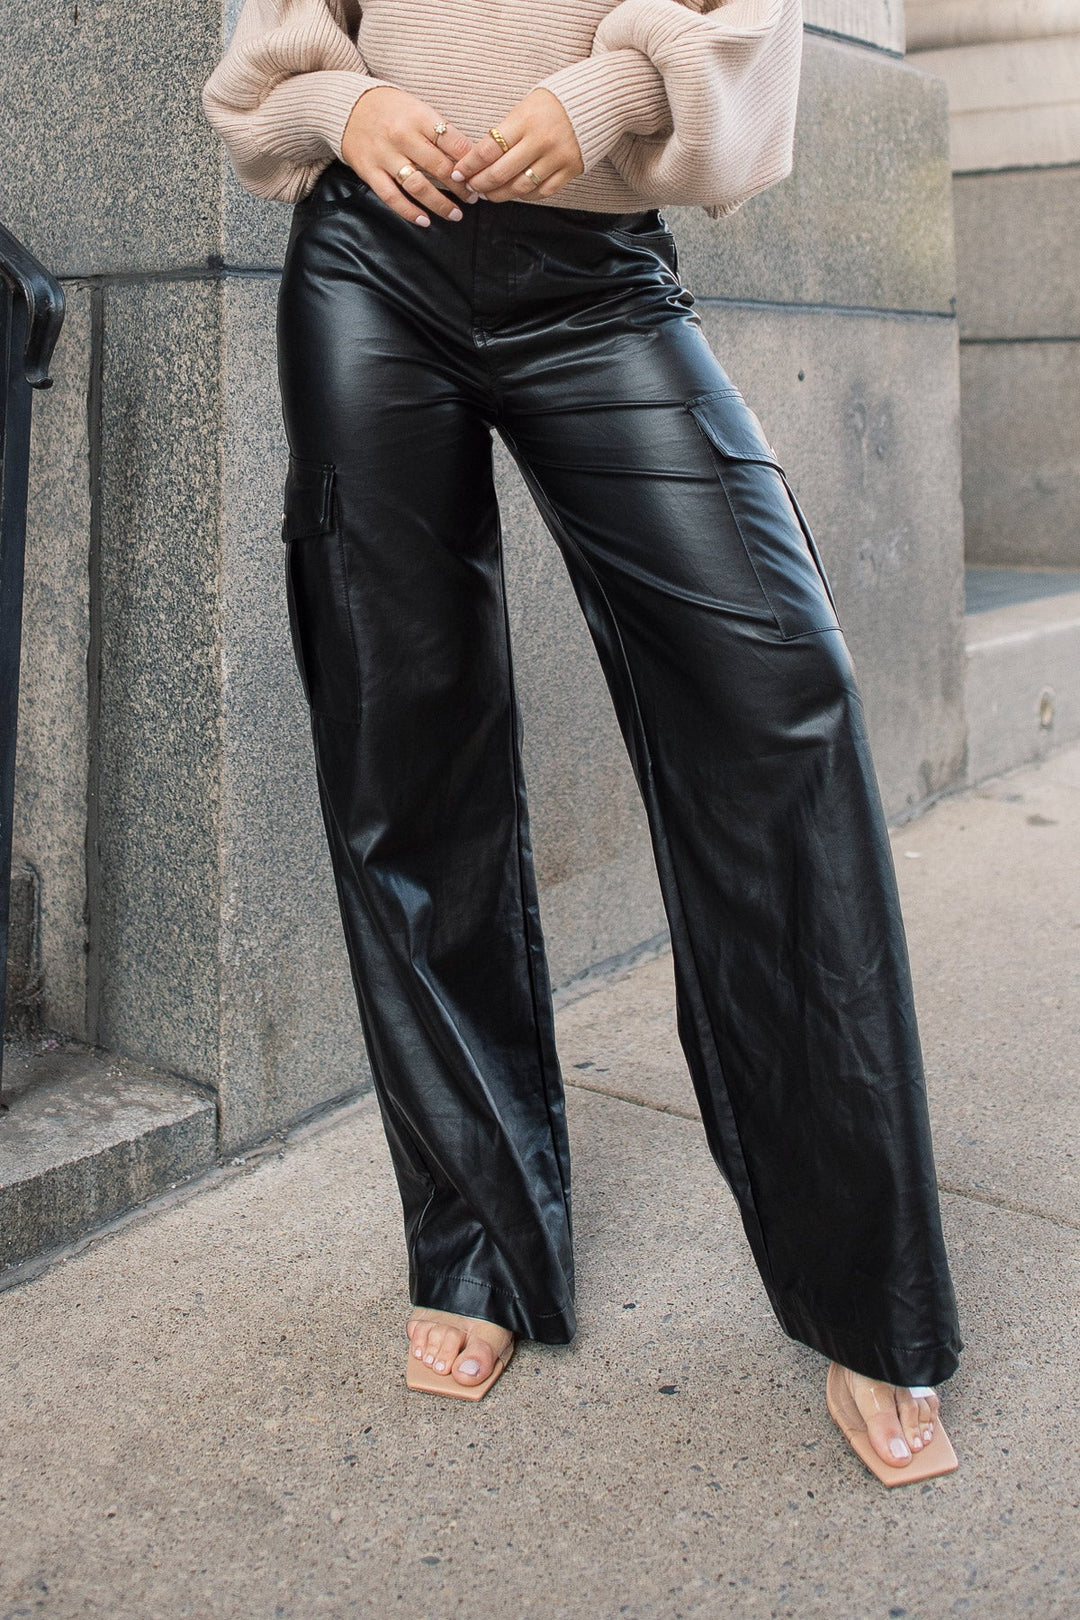 Trendy Girl Black Faux Leather Pants: Transition from Day to Night | JO+CO Black / L